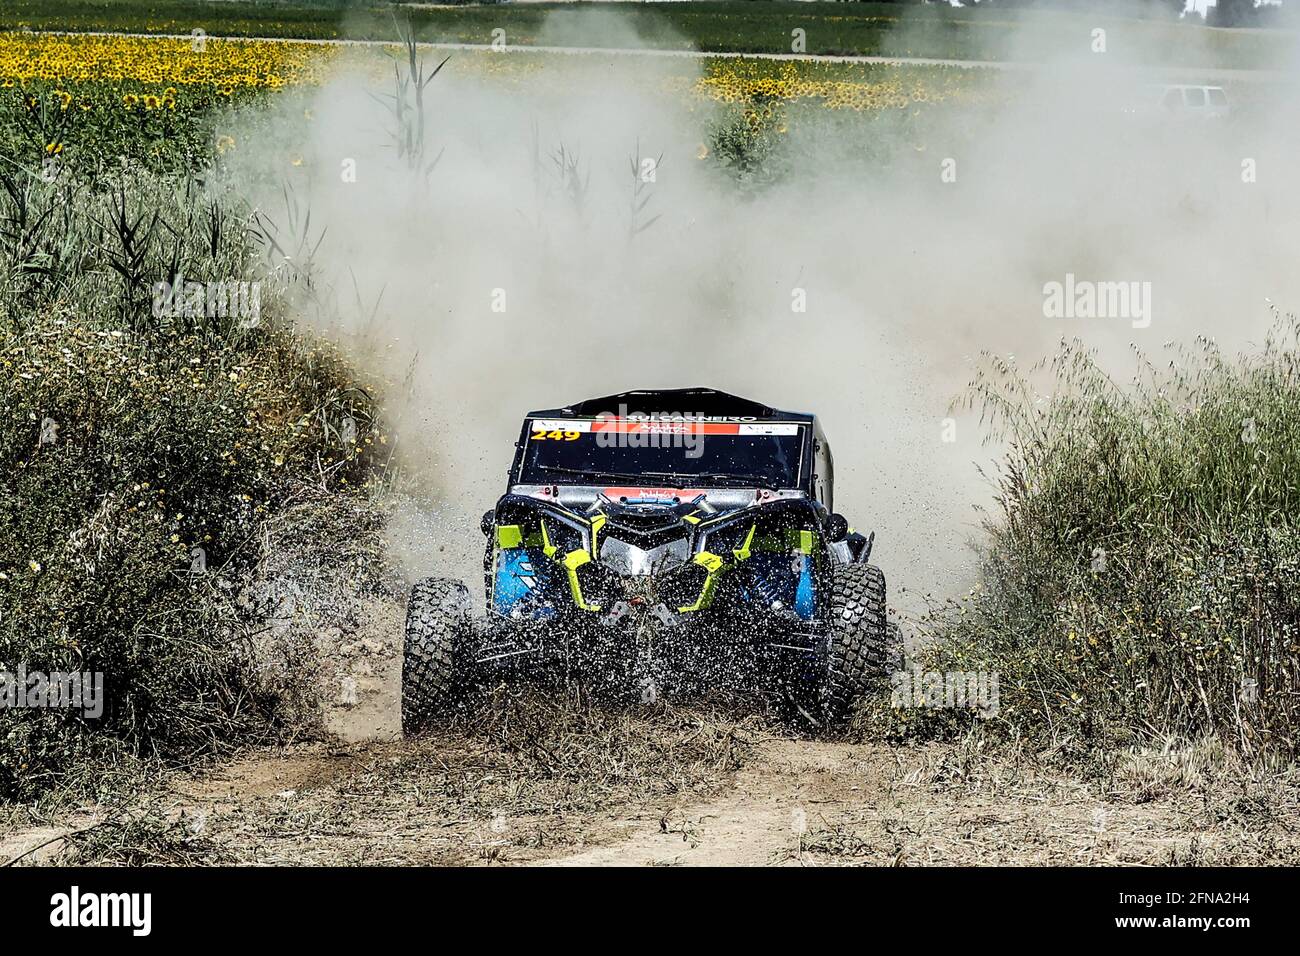 Seville, Spain. 15th May, 2021. In action during the stage of the Andalucia Rally 2021 rally route, a preparation test for the Rally Dakar 2022, in Viso del Alcor, Seville, Spain, 15 May 2021. Credit: Jose Luis Contreras/DAX/ZUMA Wire/Alamy Live News Stock Photo